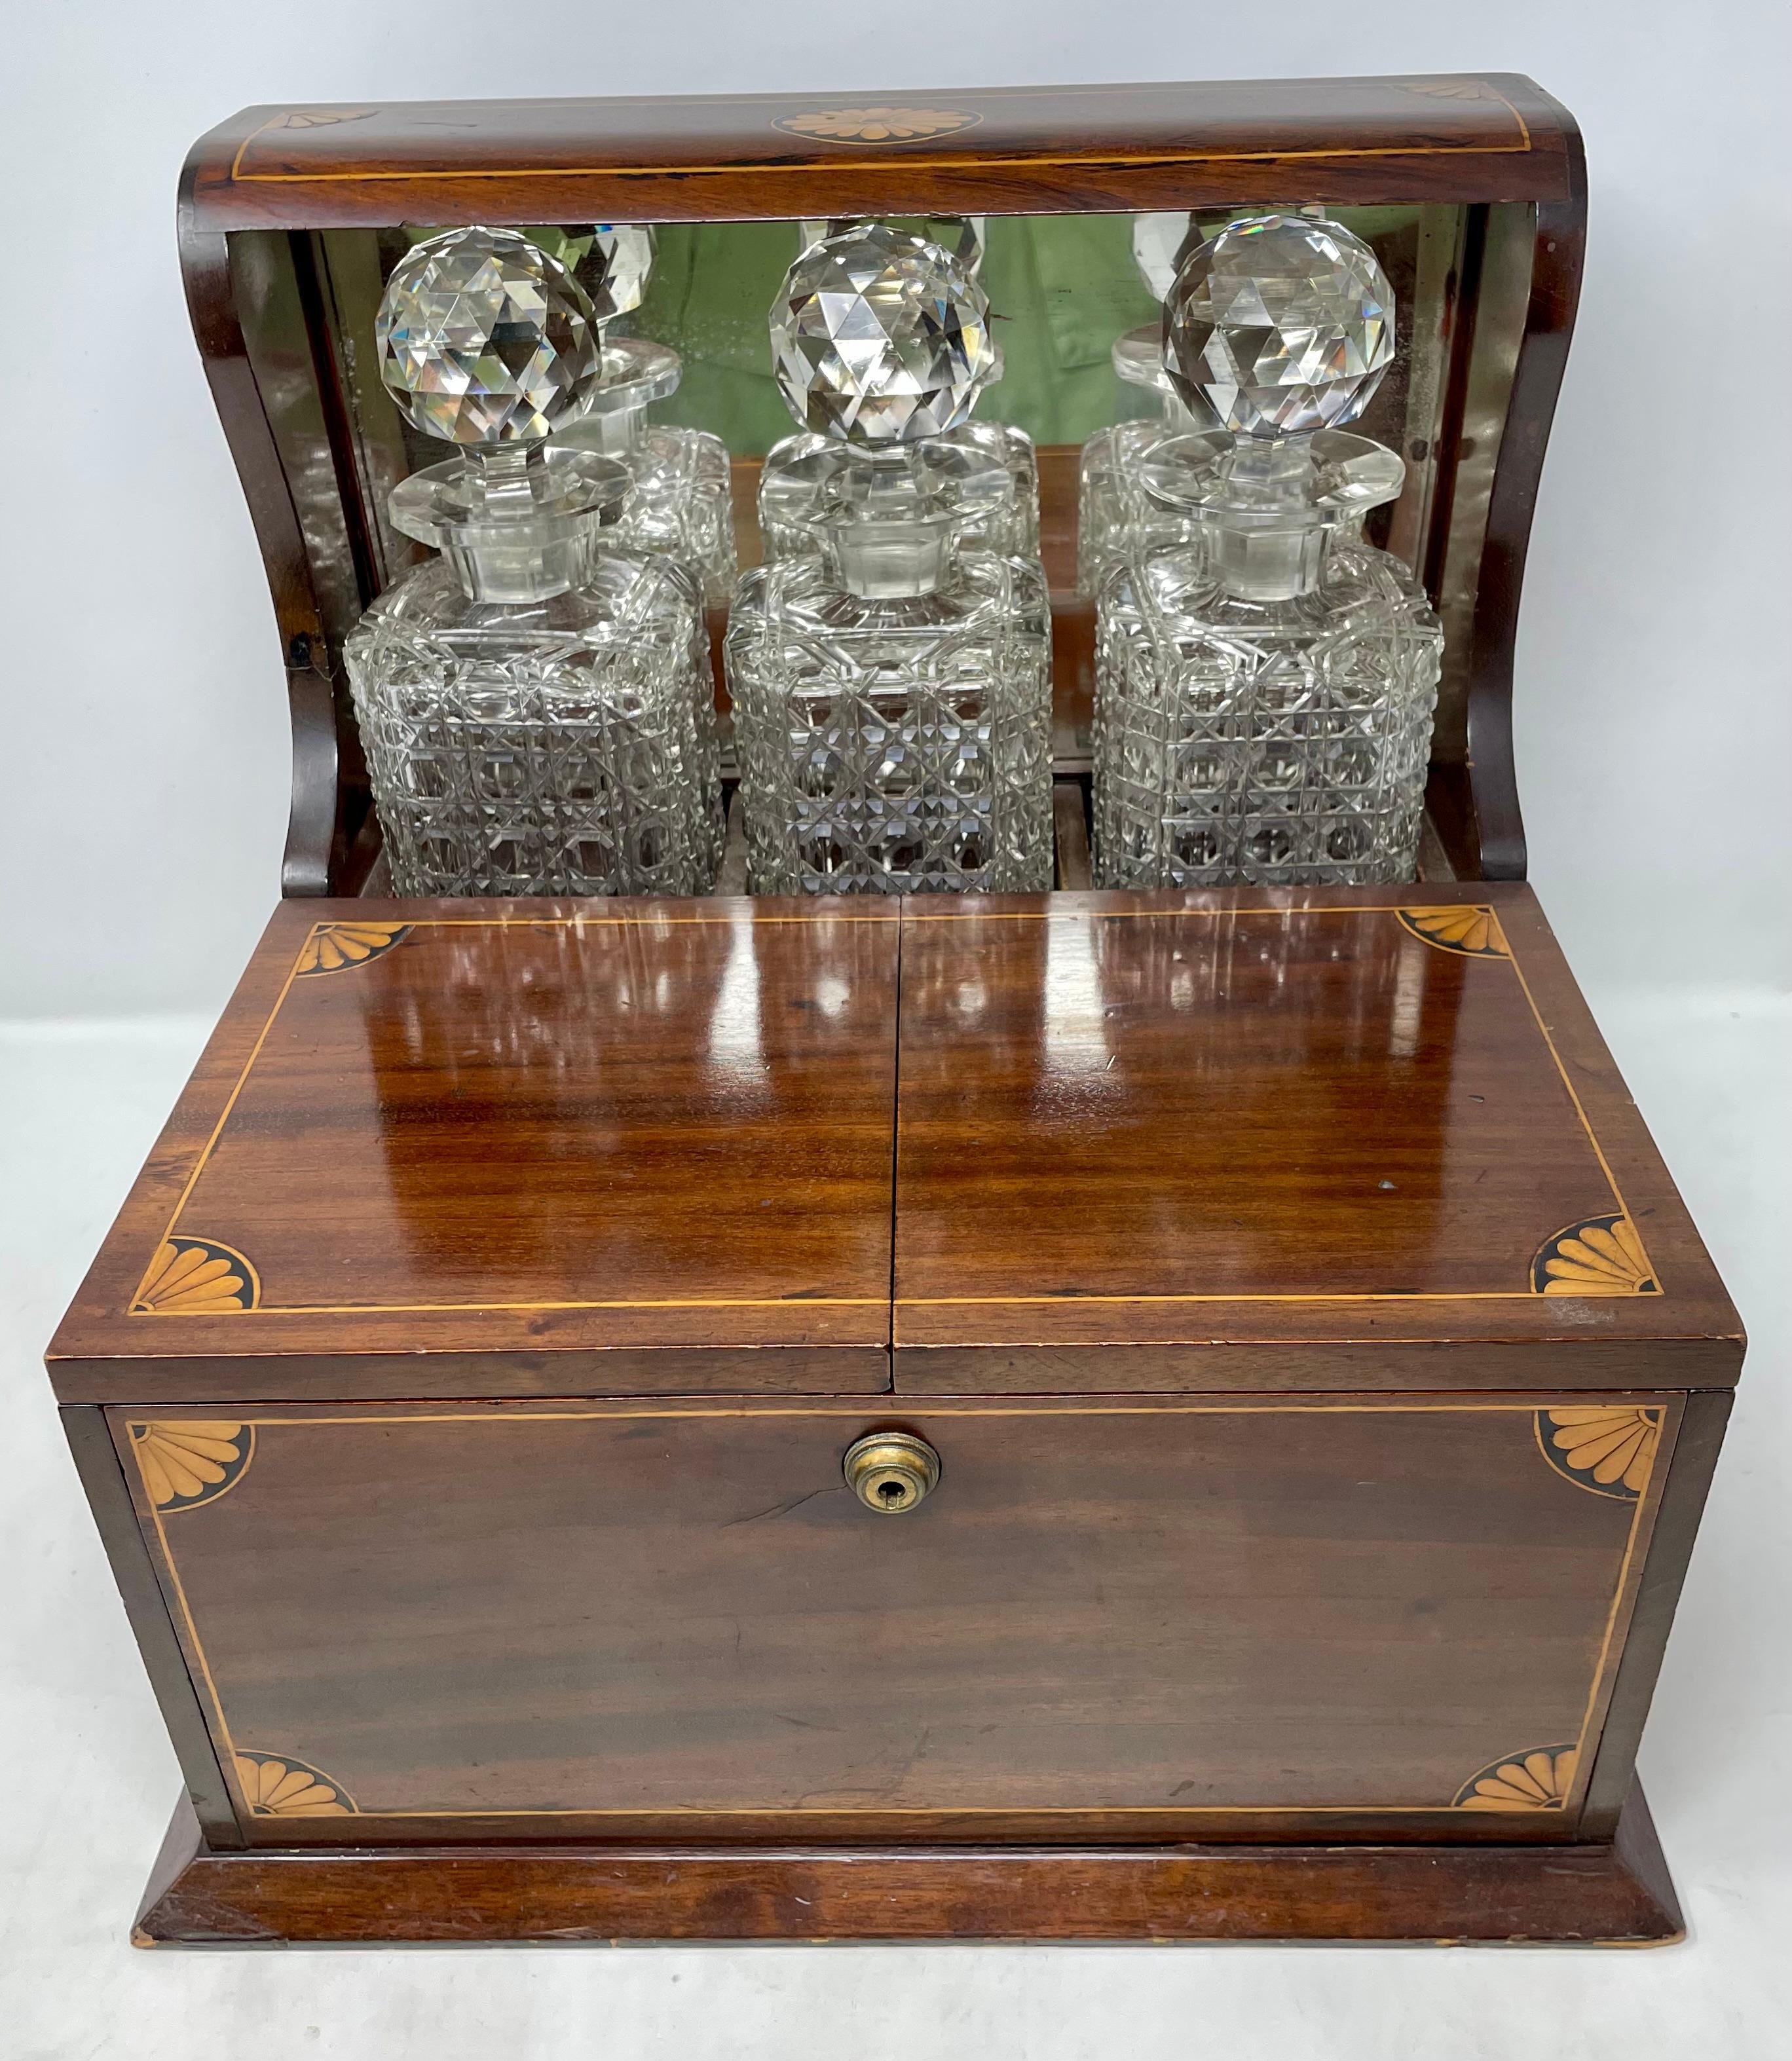 Antique English inlaid mahogany & cut crystal games box tantalus, Circa 1880.
Includes Crystal Glassware, Cigar Cutter, Silver-Plated Dishes and Games.